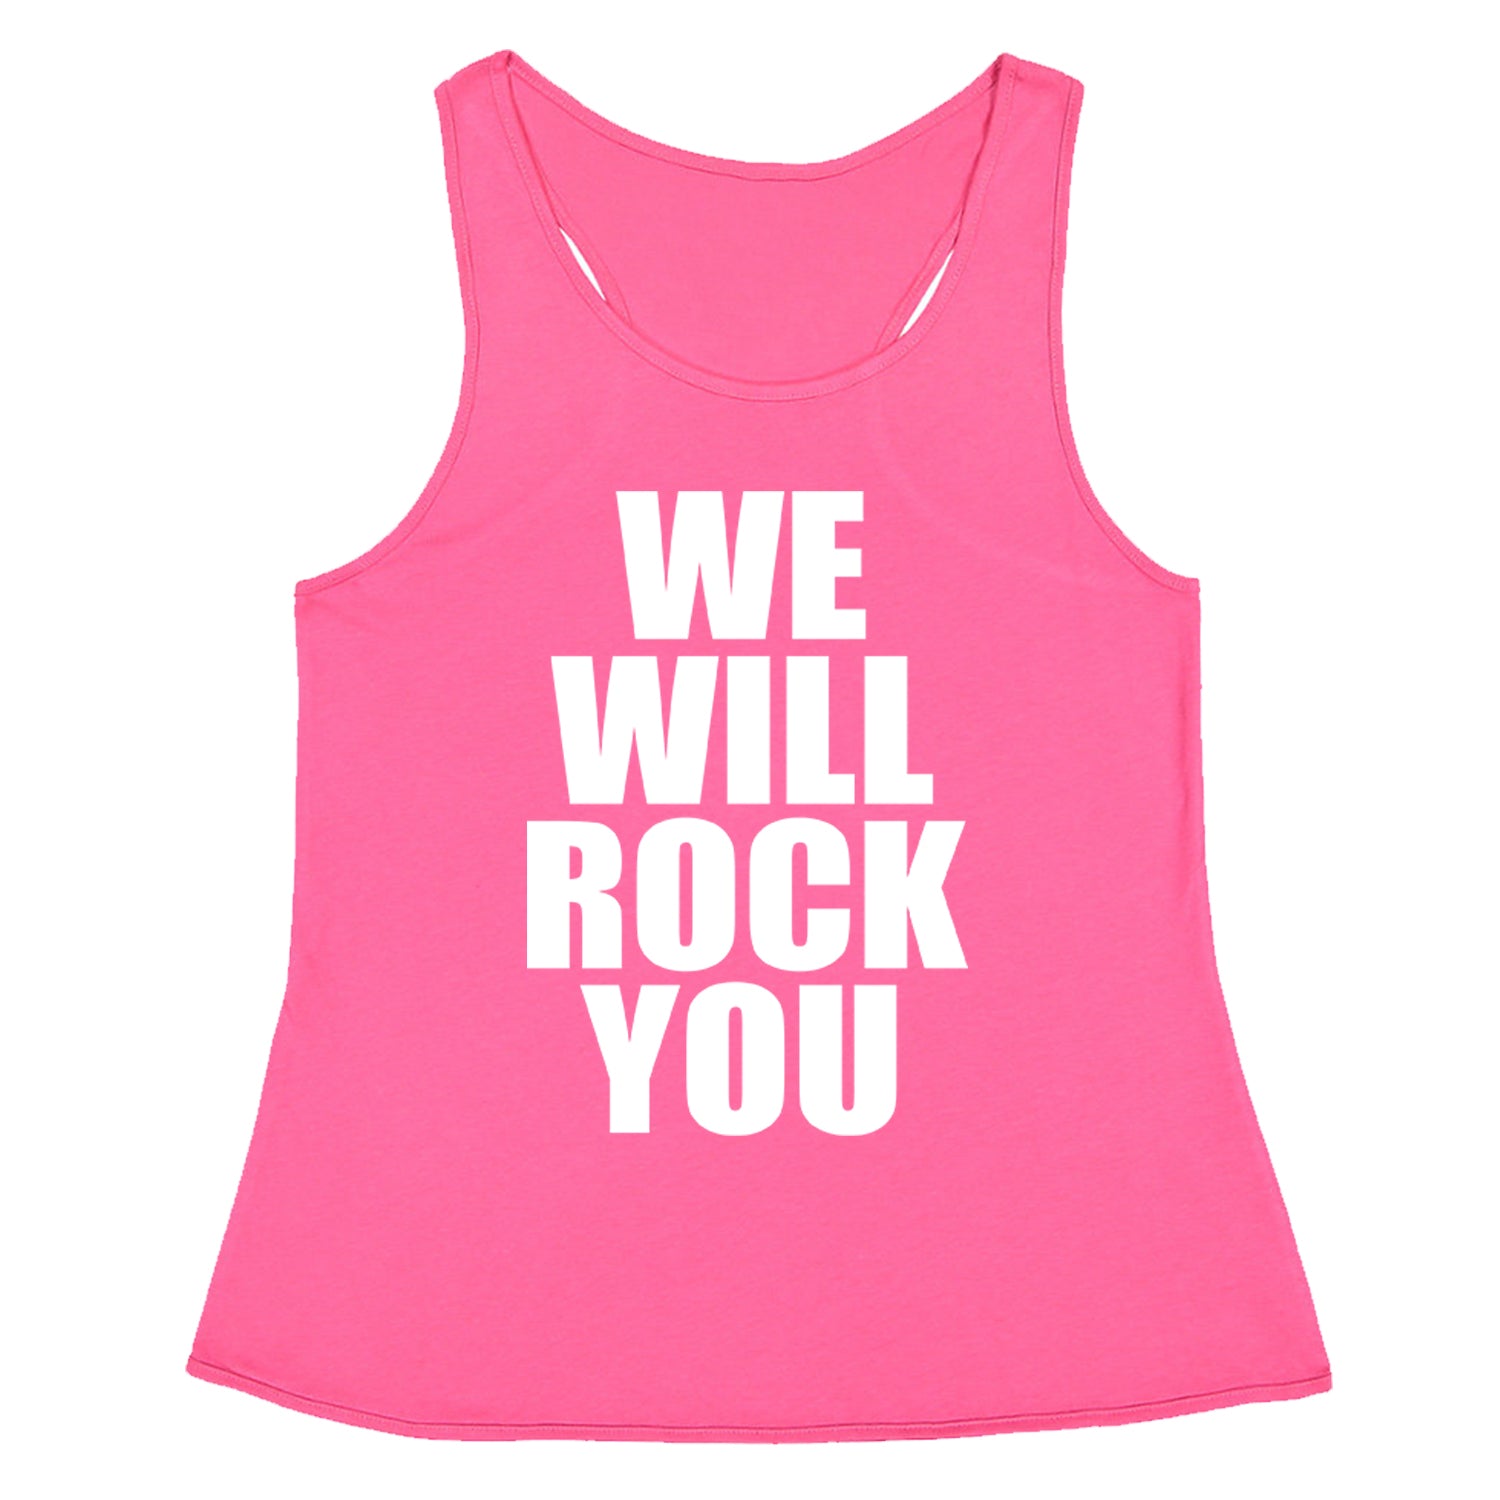 We Will Rock You Racerback Tank Top for Women #expressiontees by Expression Tees